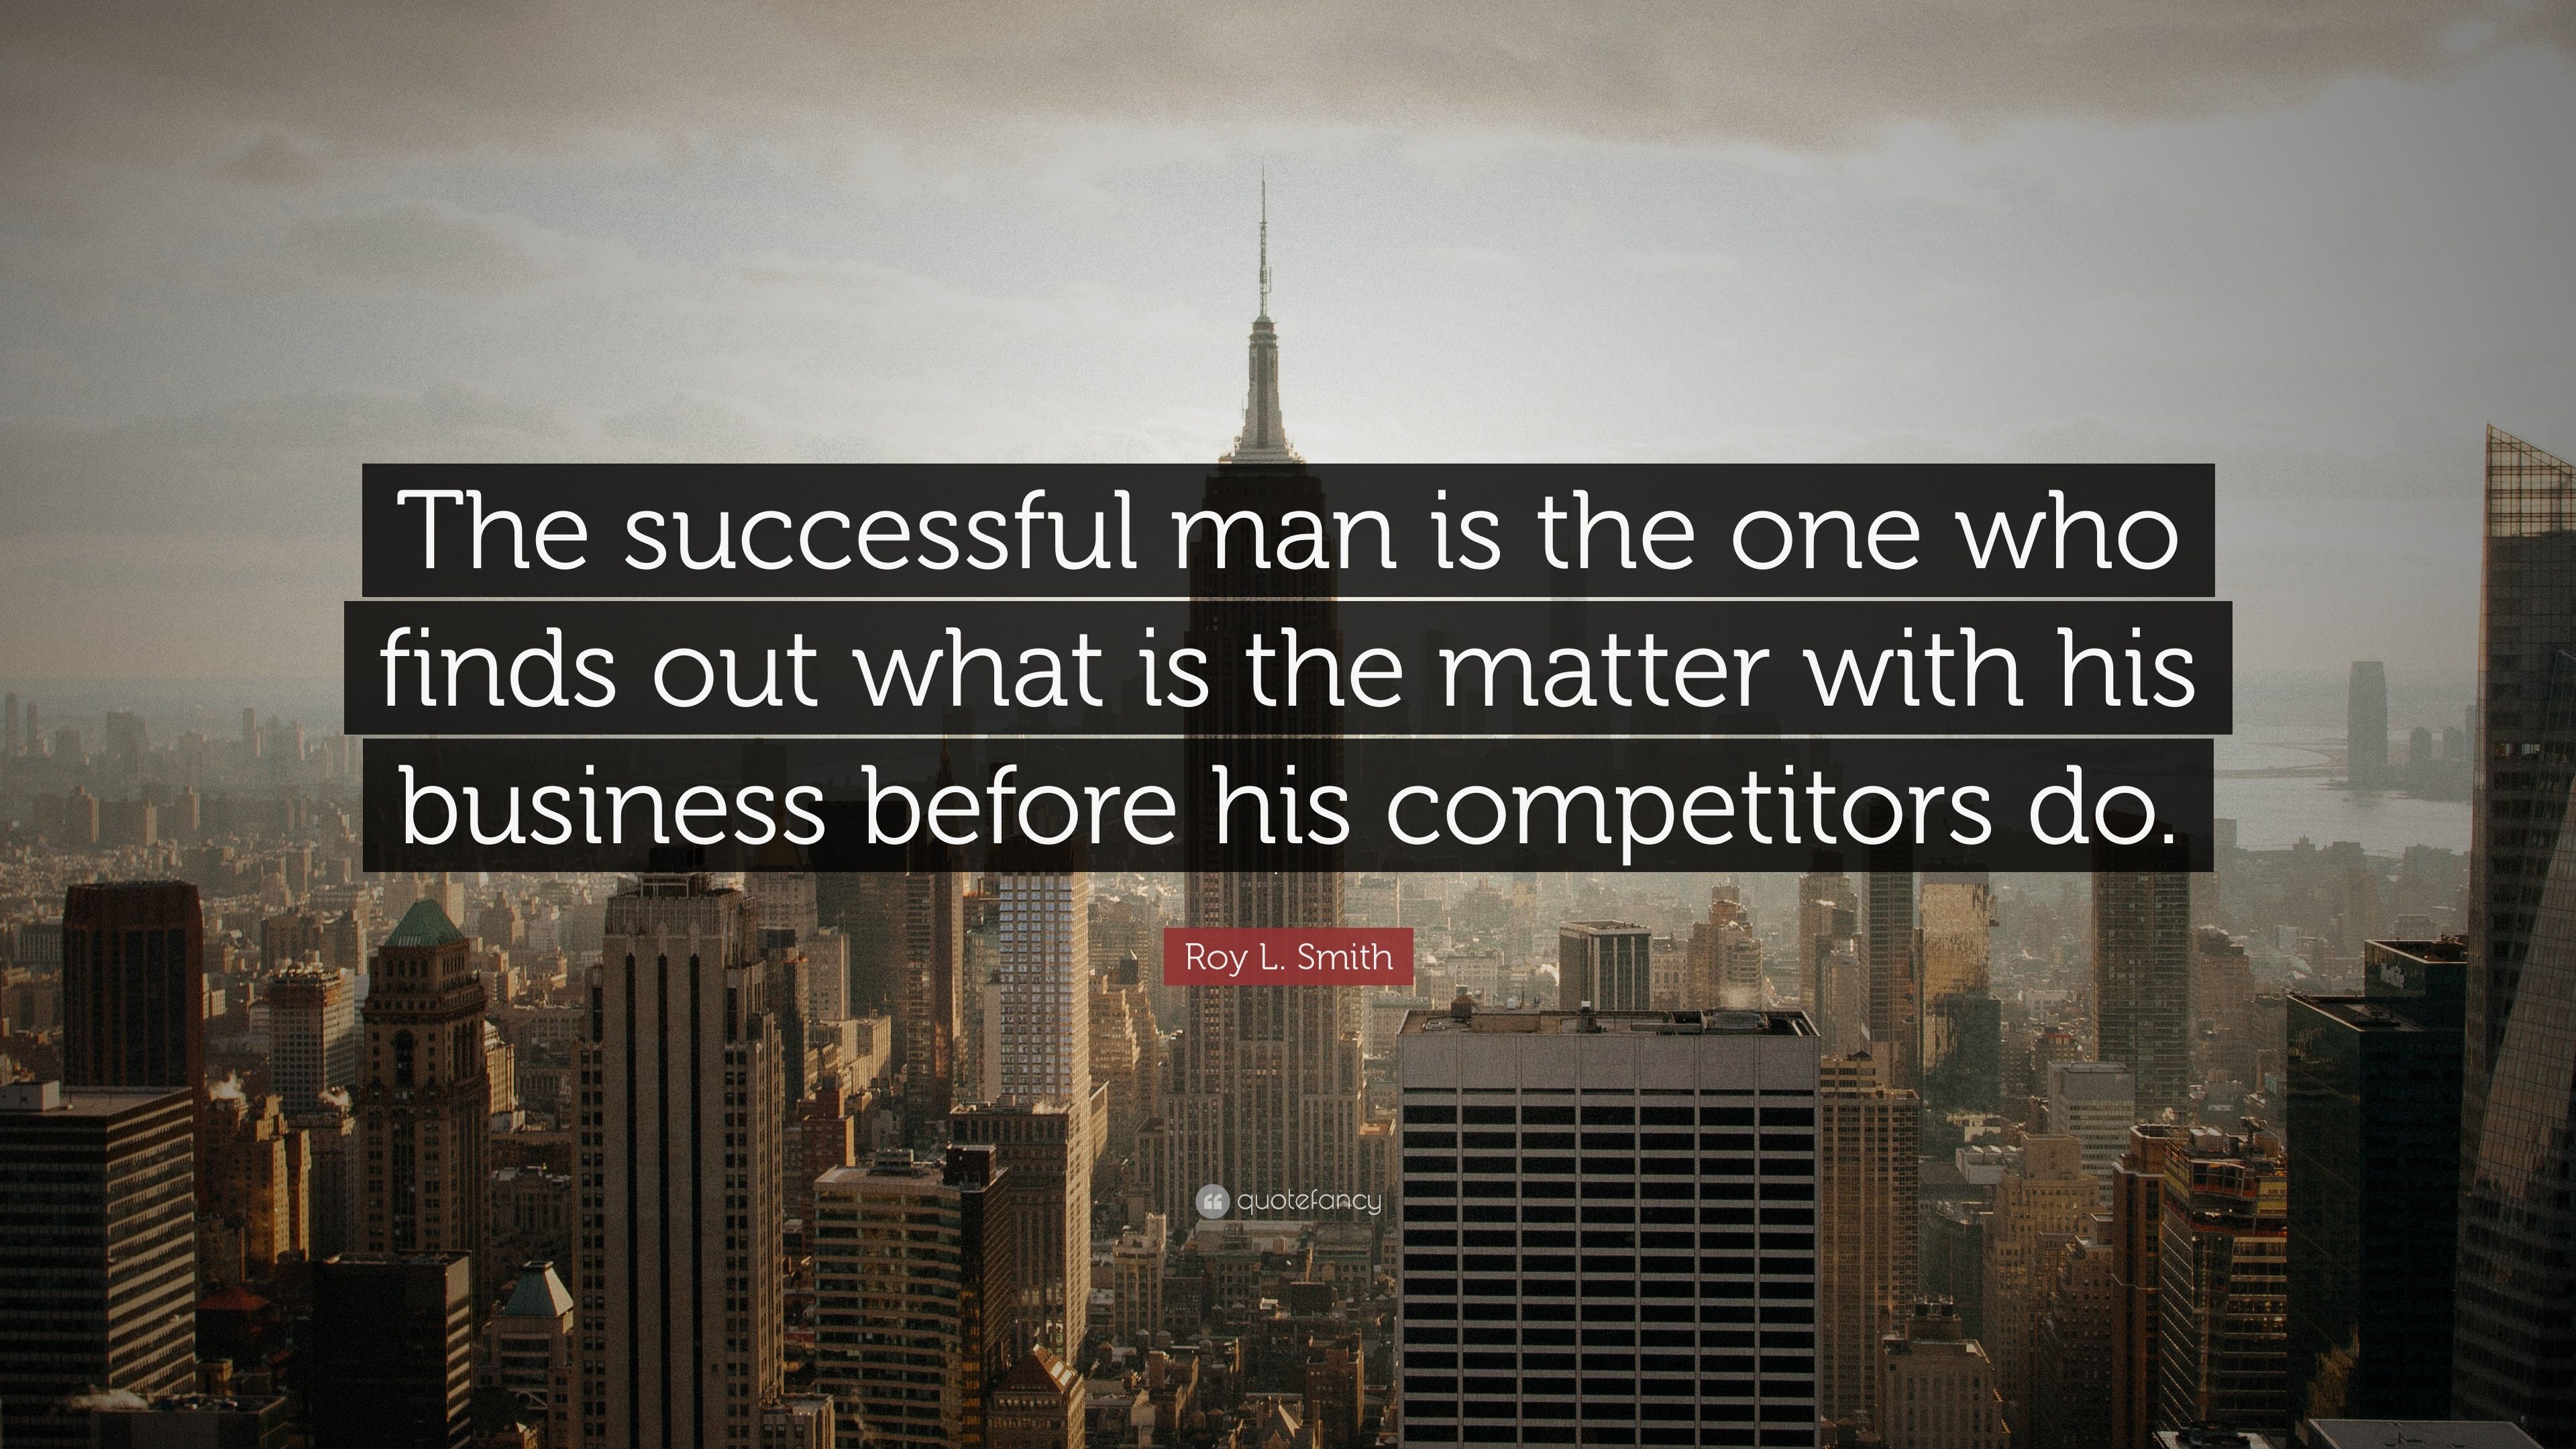 Roy L. Smith Quote: “The successful man is the one who finds out what is the